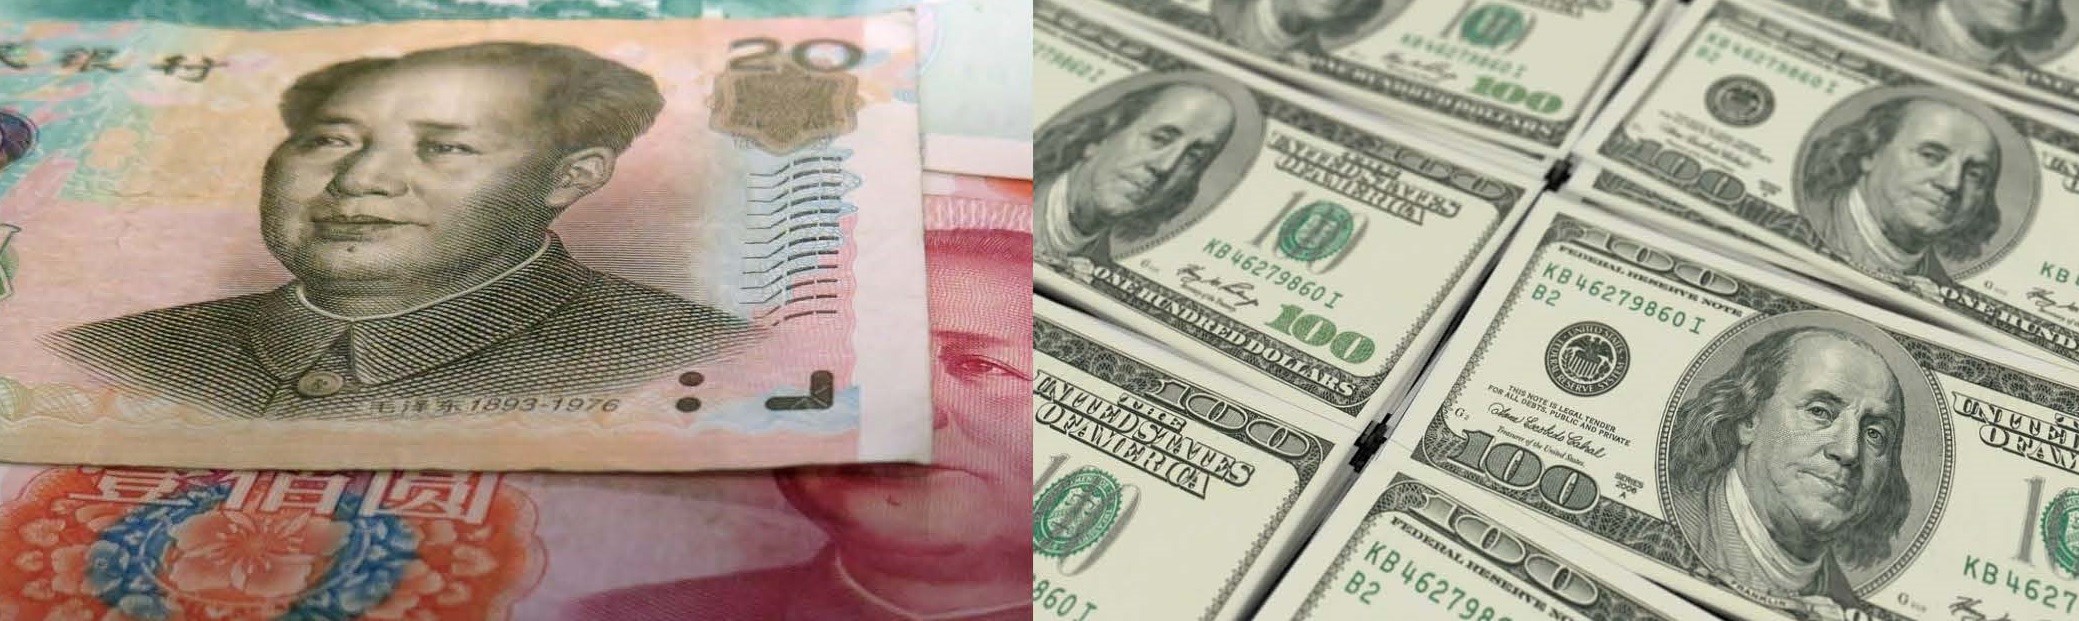 Dollar chinese currency